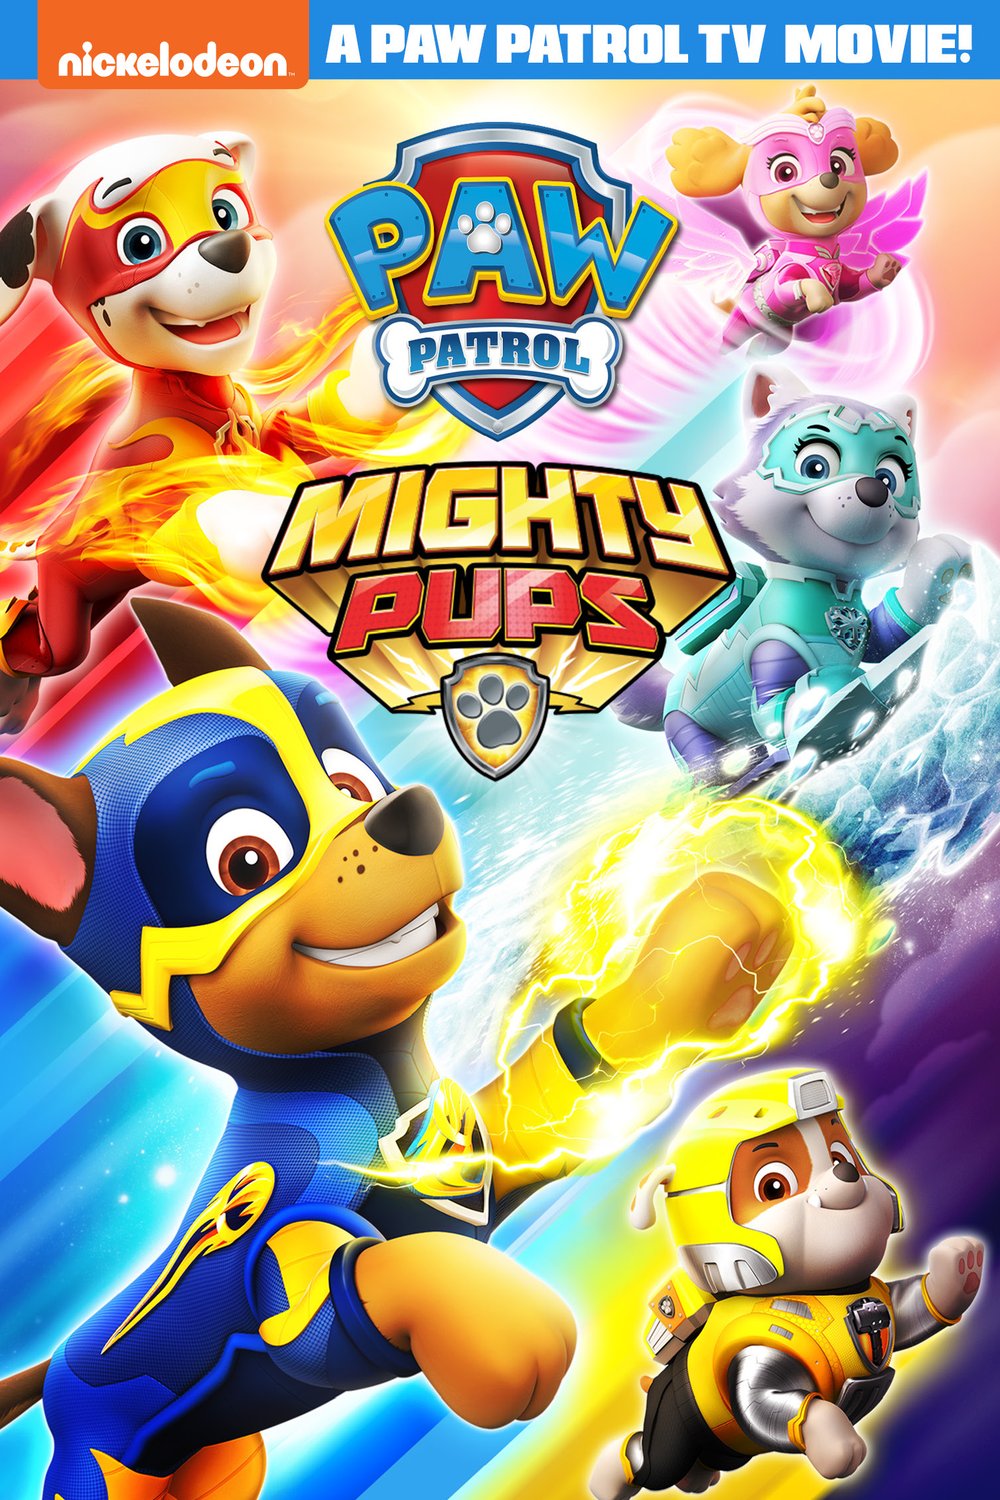 Poster of the movie Paw Patrol: Mighty Pups